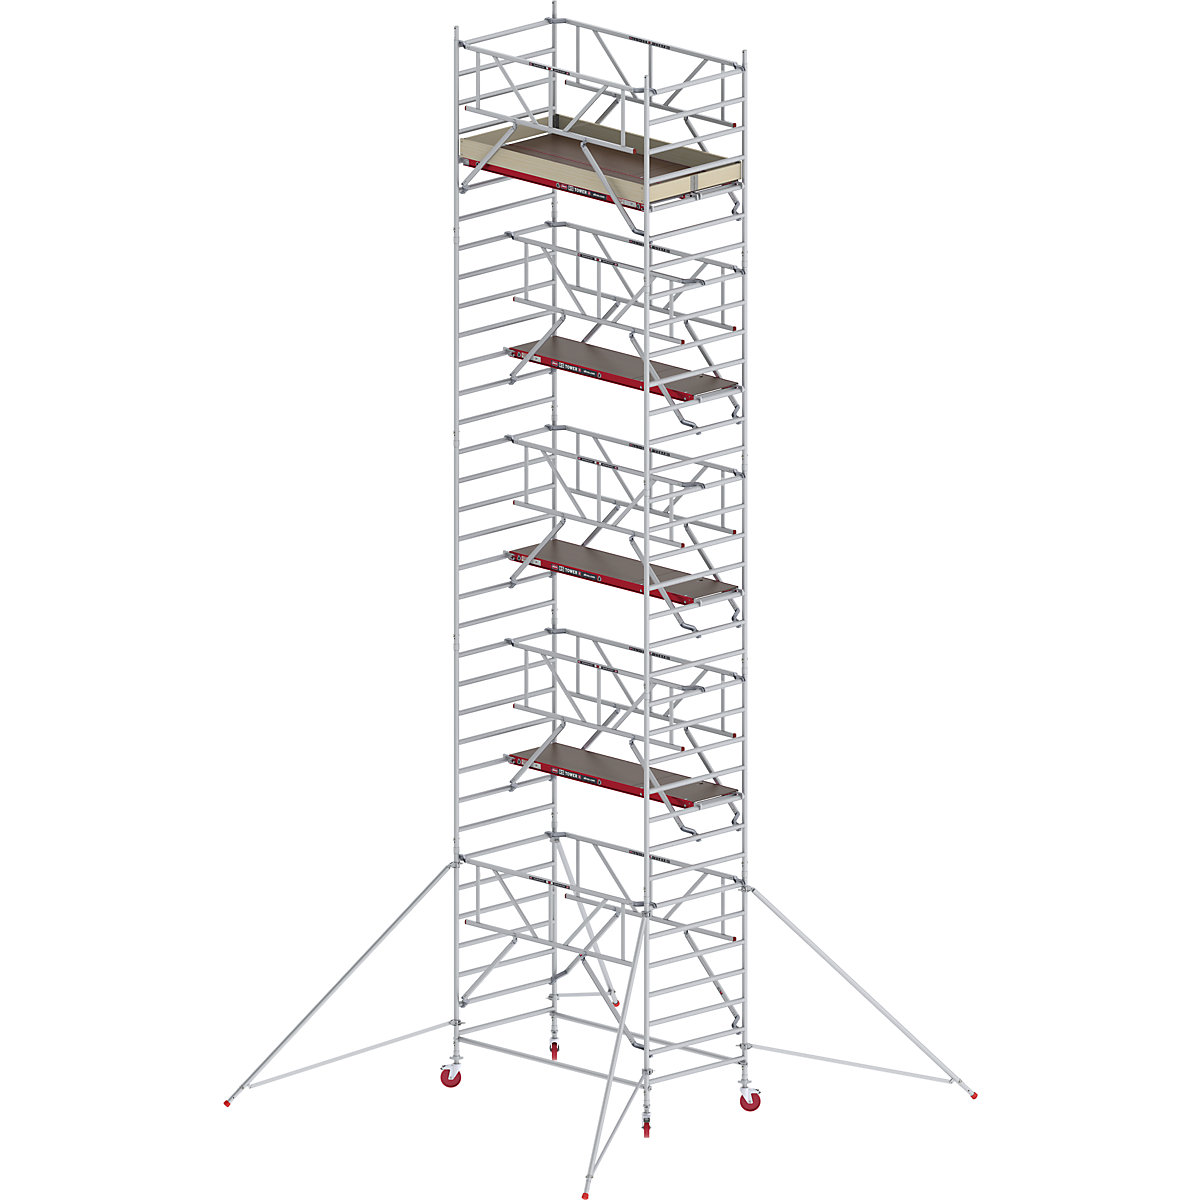 RS TOWER 42 wide mobile access tower with Safe-Quick® – Altrex, wooden platform, length 1.85 m, working height 11.20 m-10